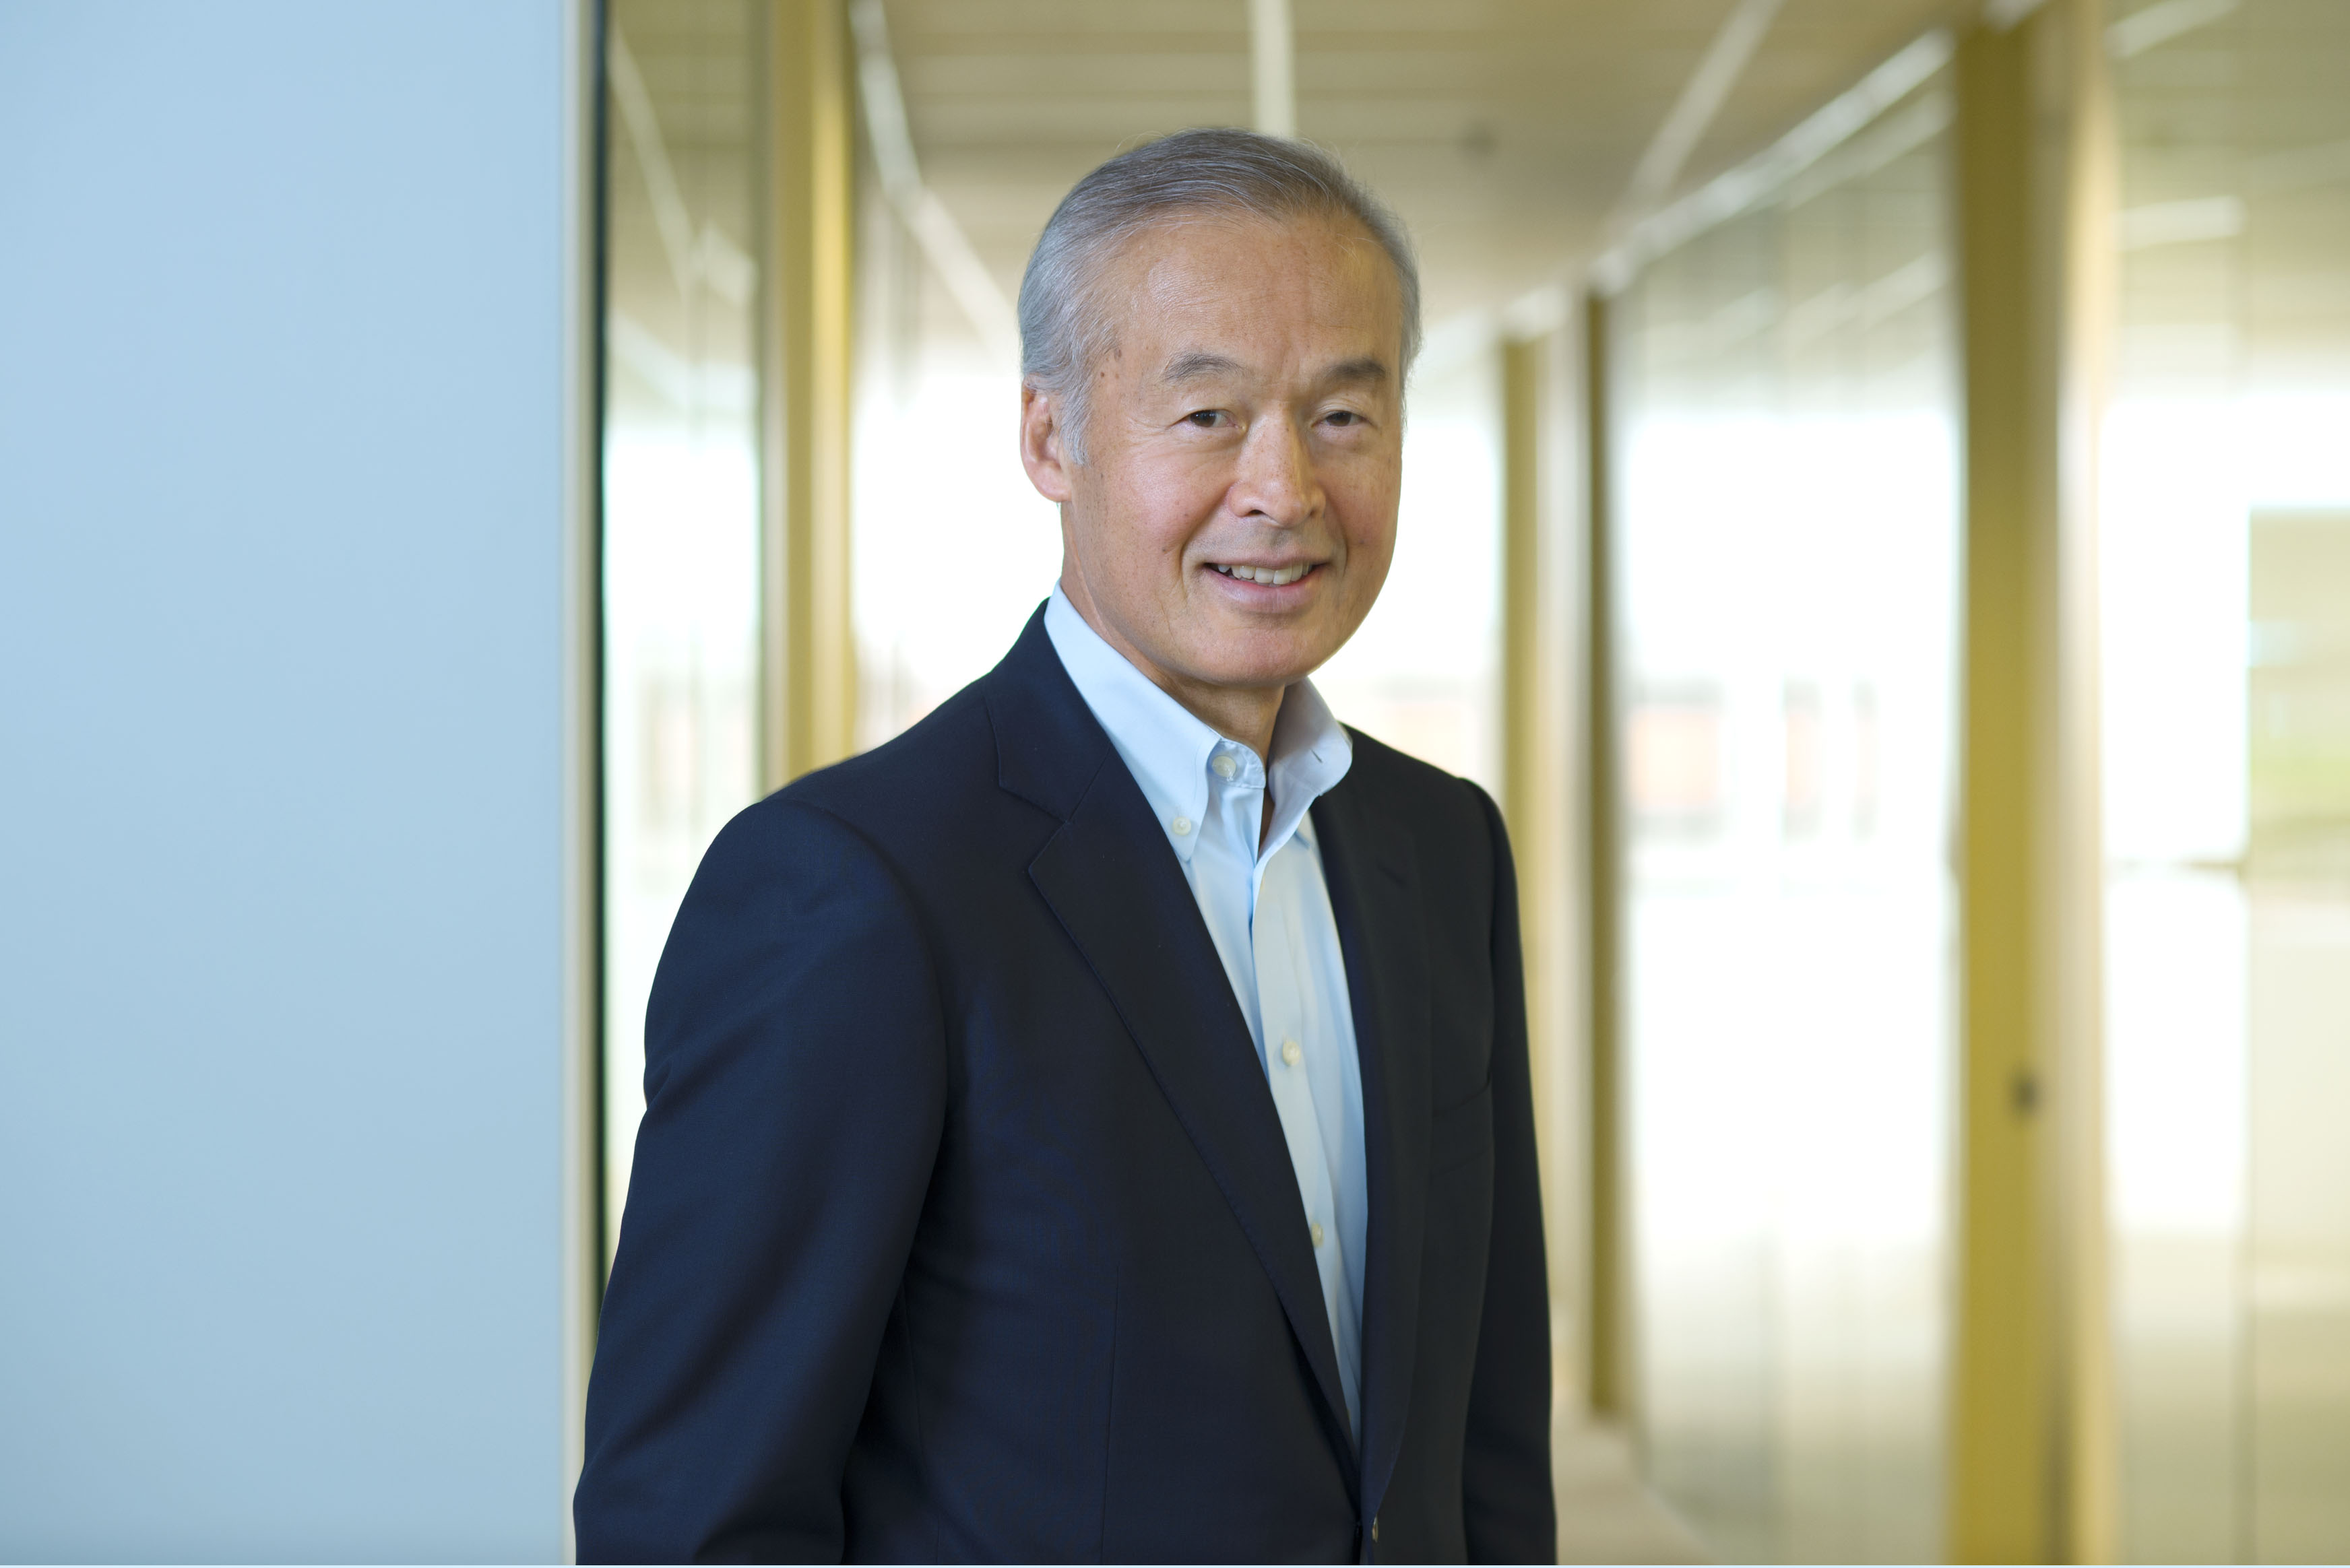 PCI Welcomes Tadataka Yamada, Former Head of GSK and Takeda R&D, to Board of Directors